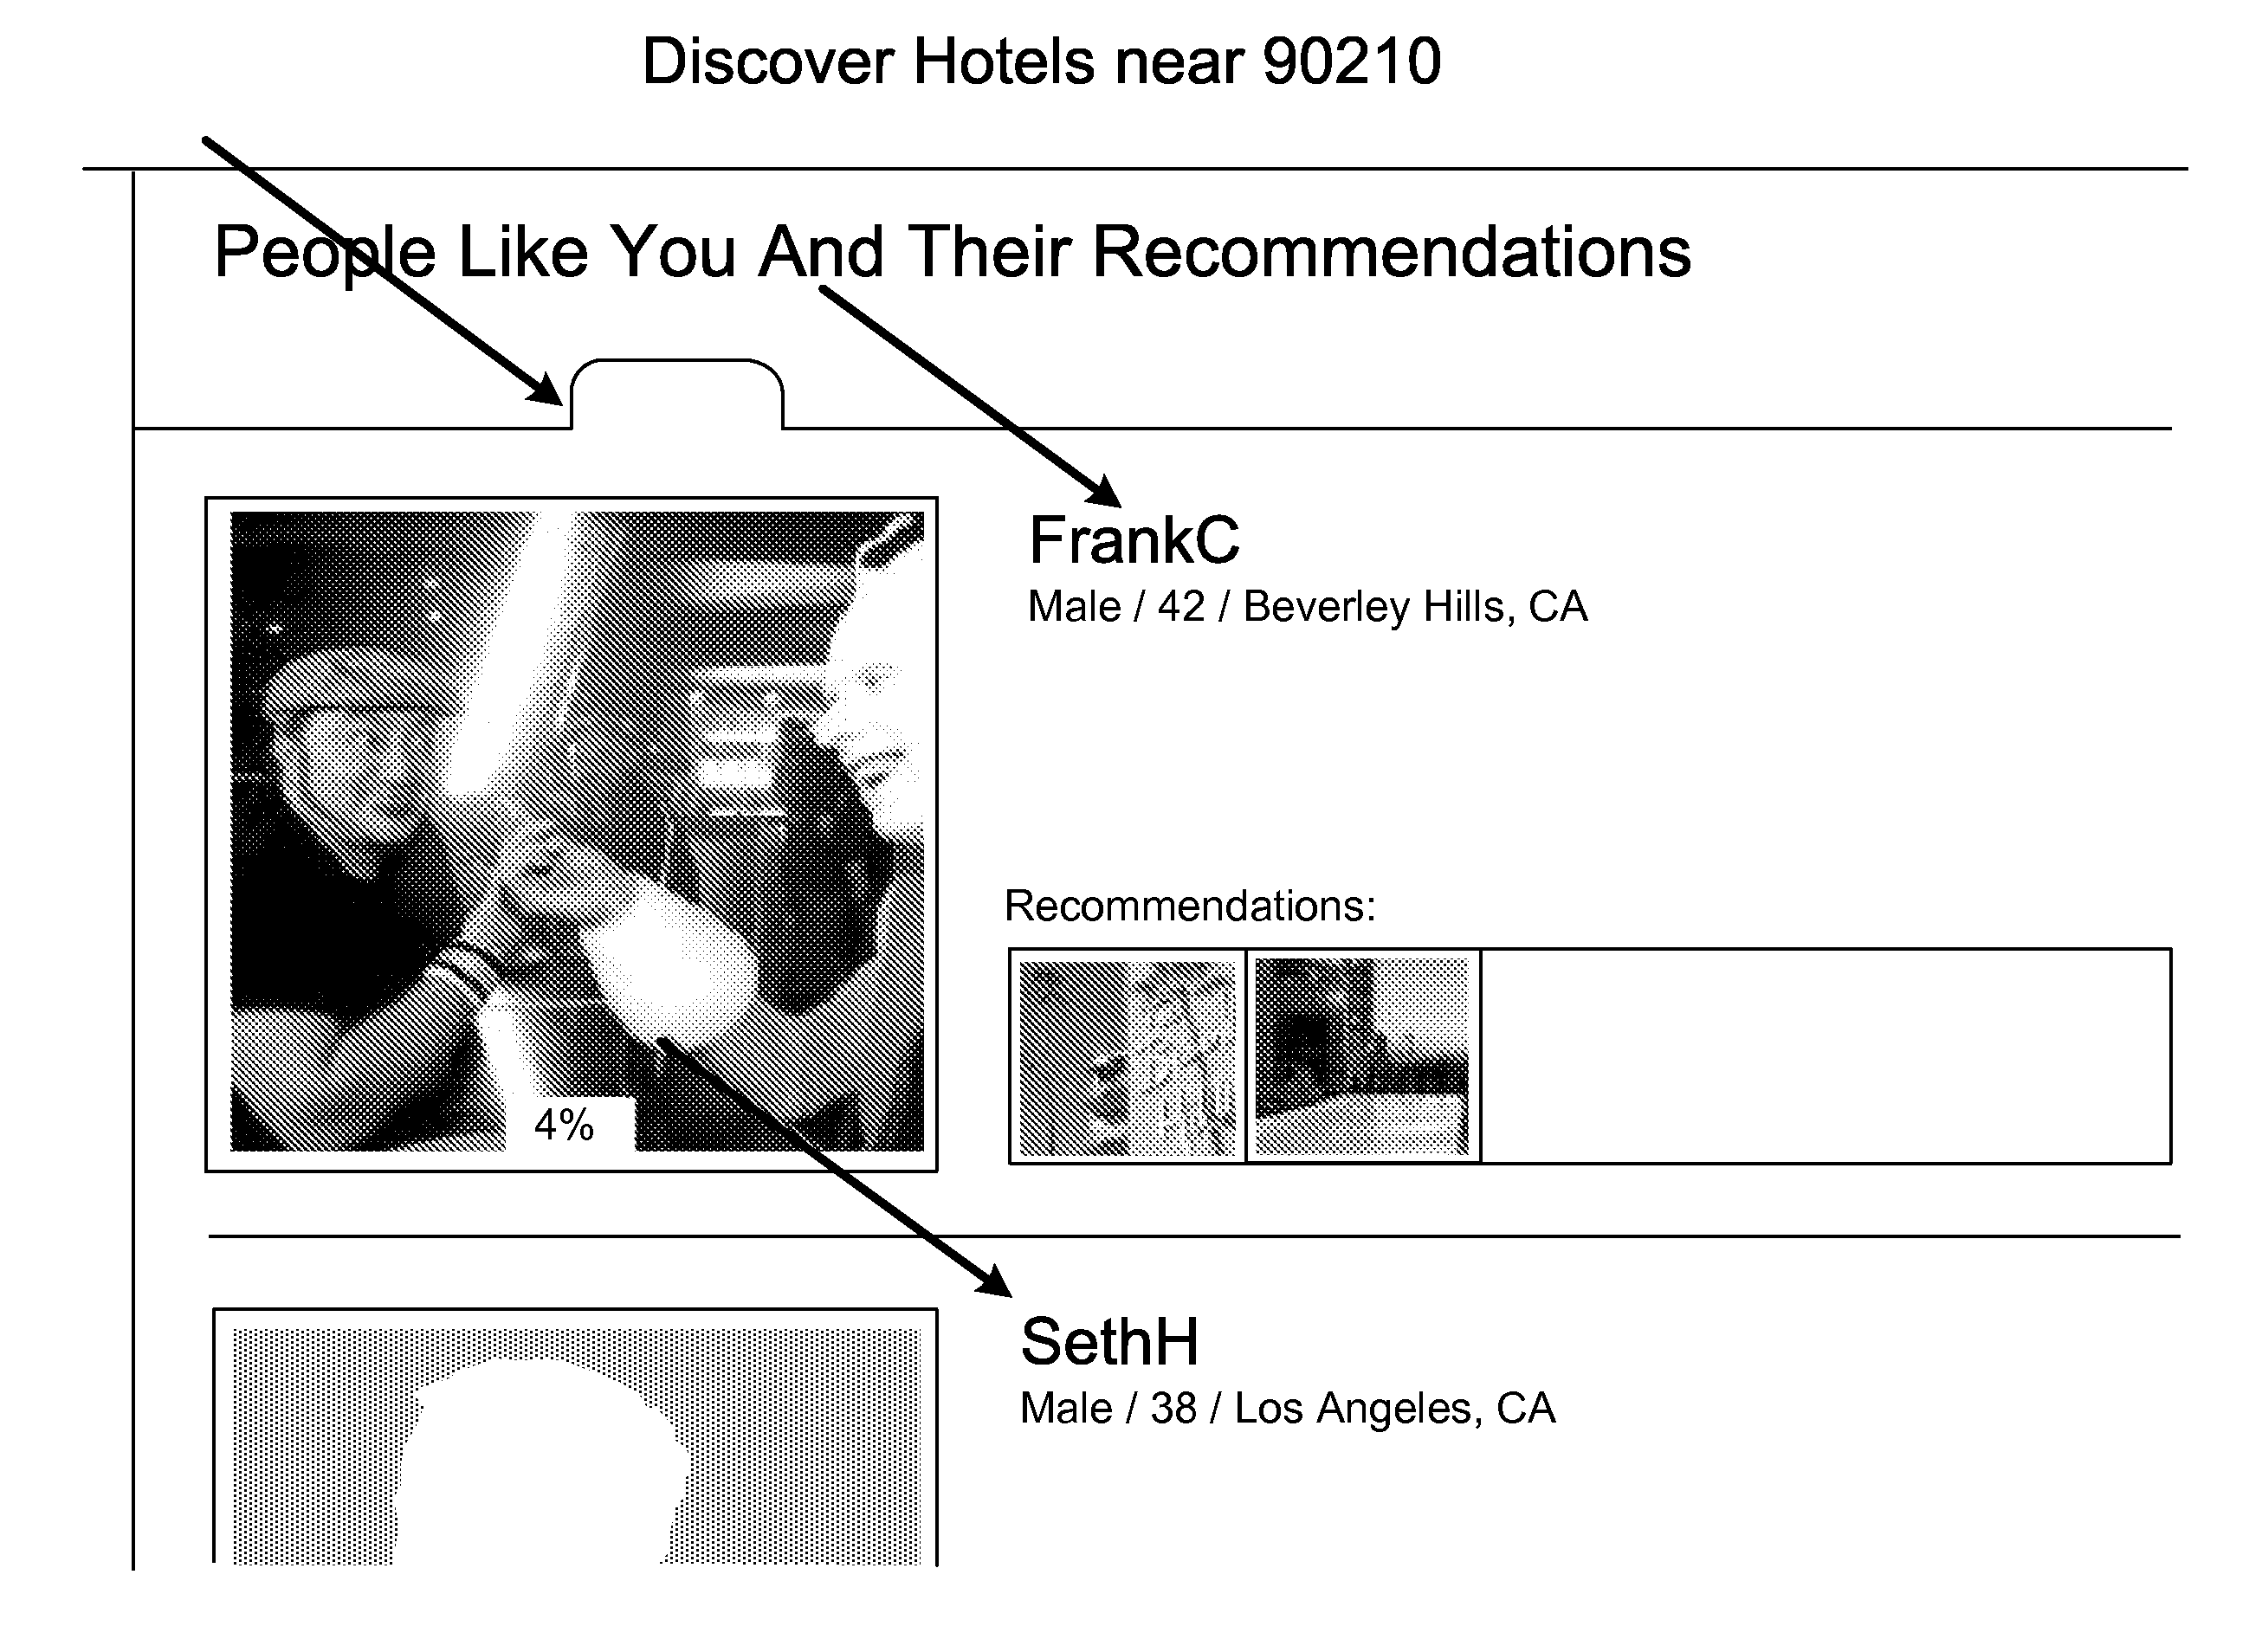 Systems and methods for photo-based content discovery and recommendation